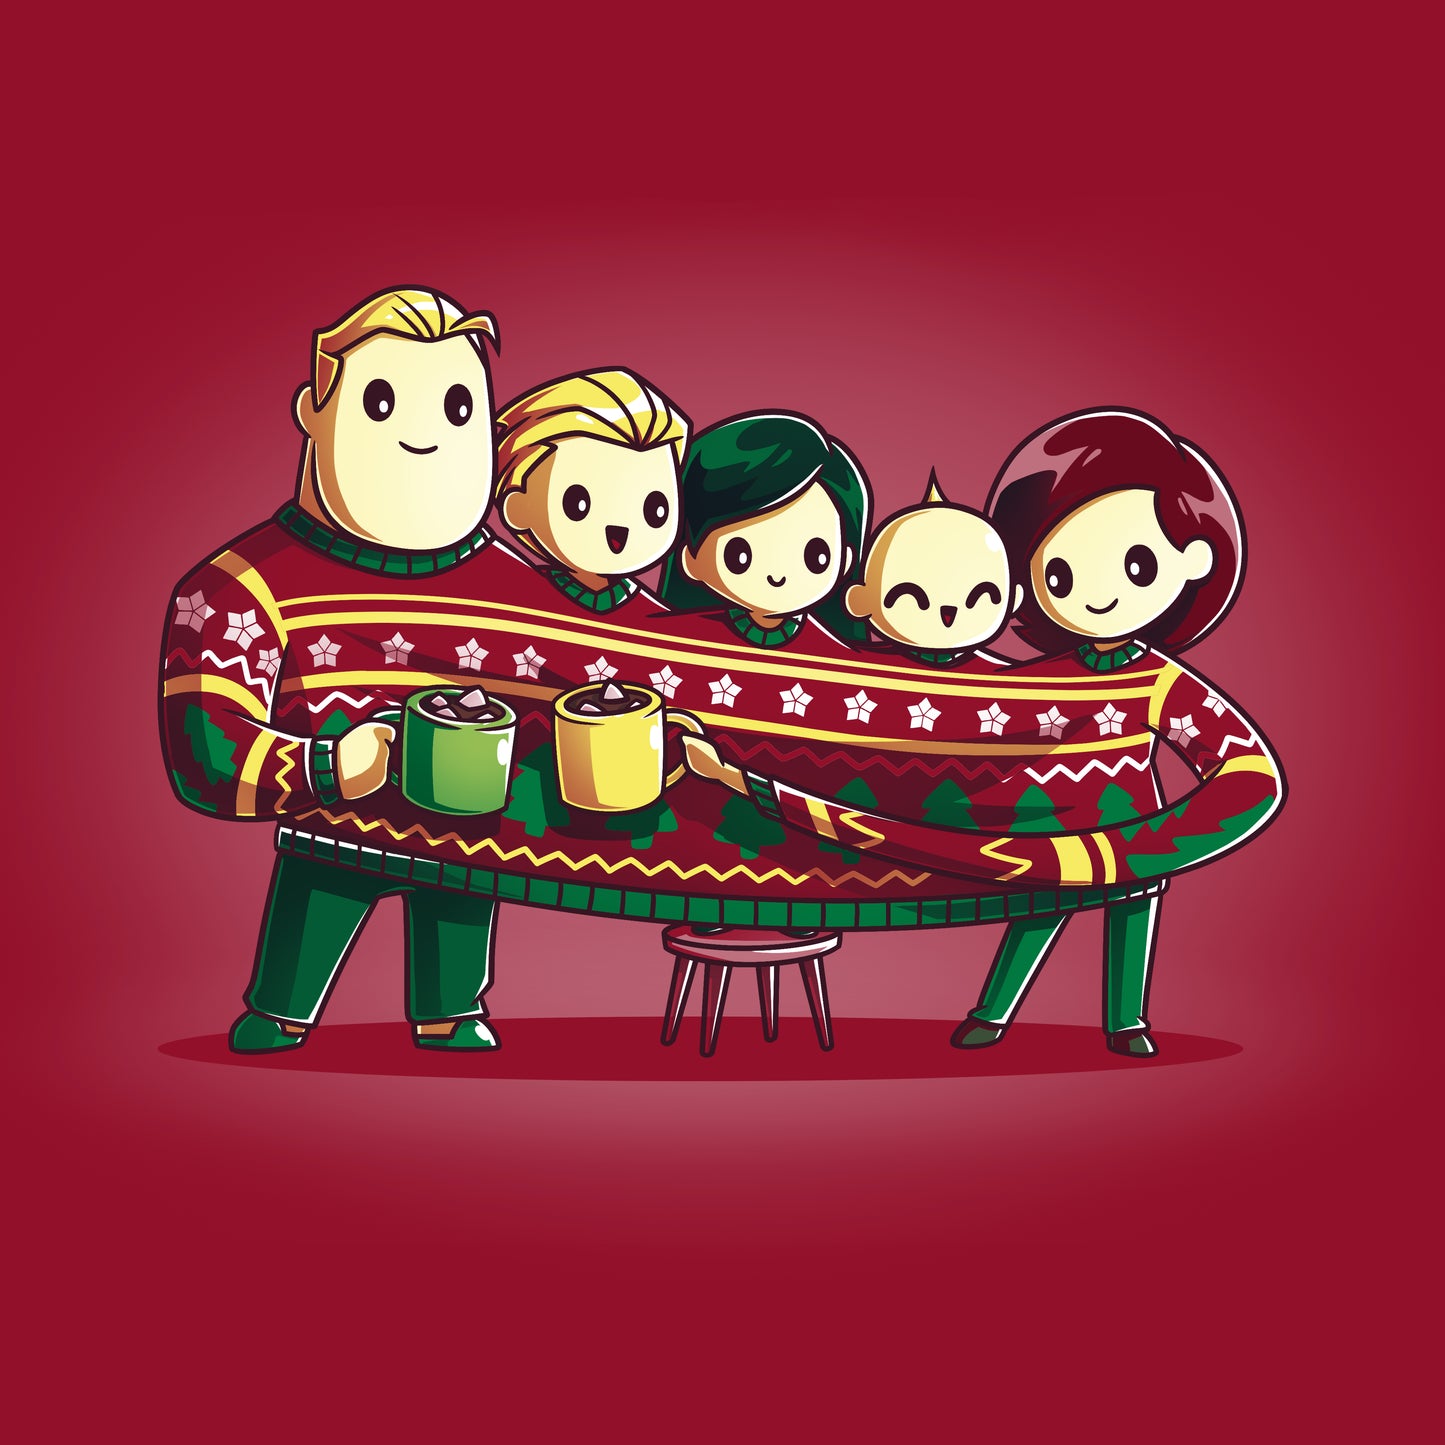 A family in "The Incredibles Family Holiday Sweater" by Pixar.